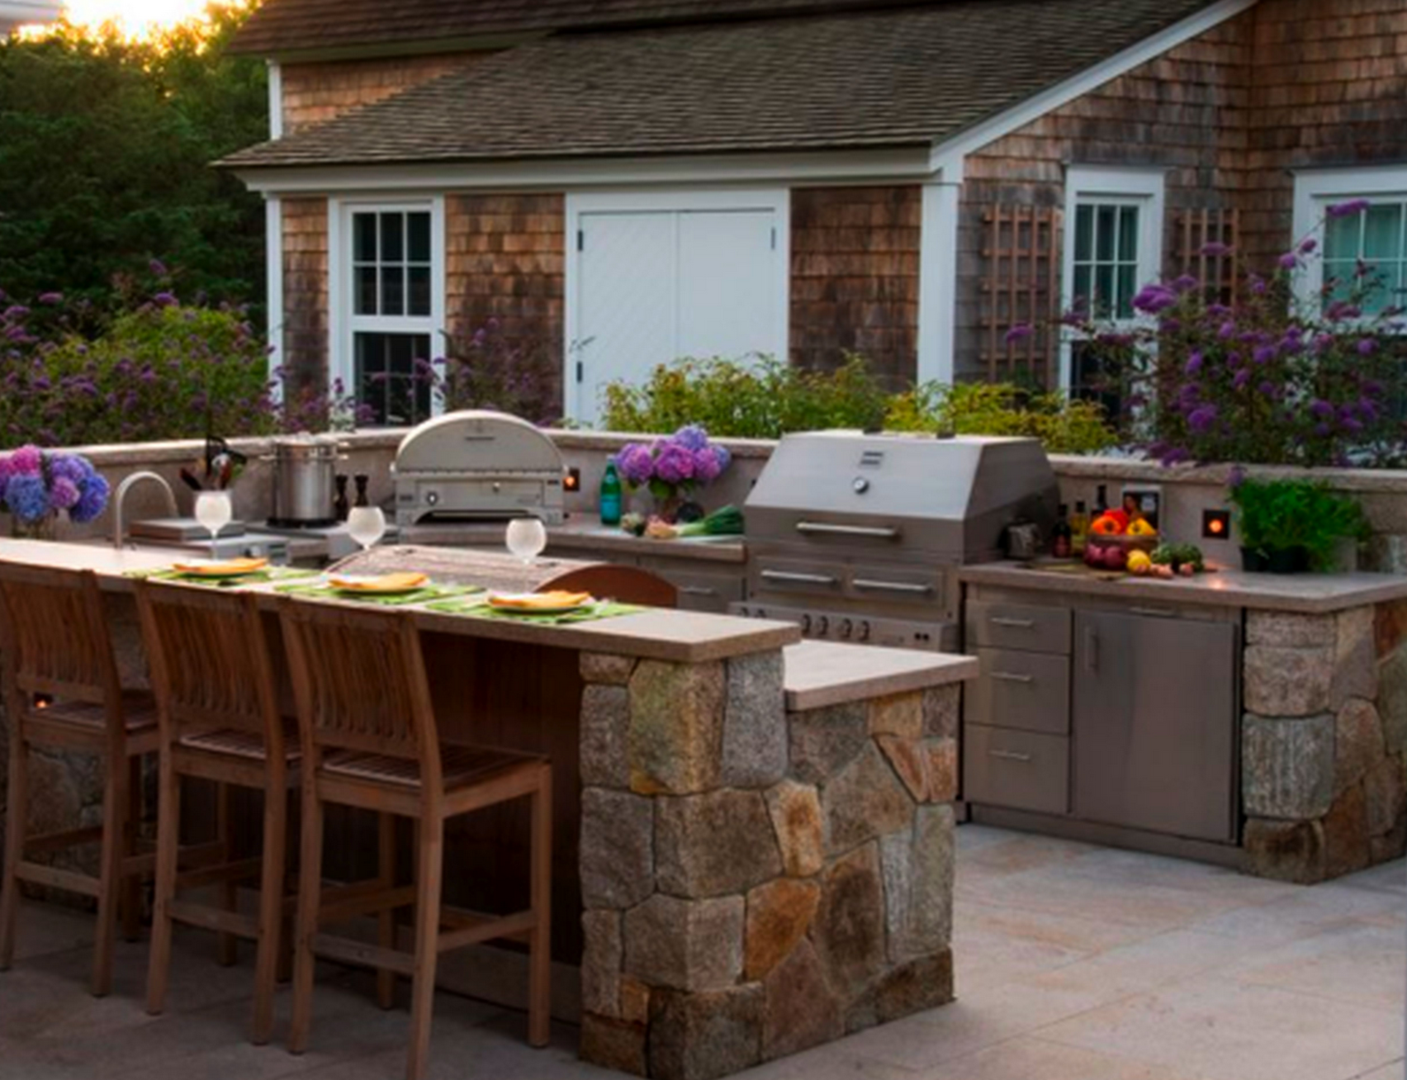 Outdoor kitchen with bar seating